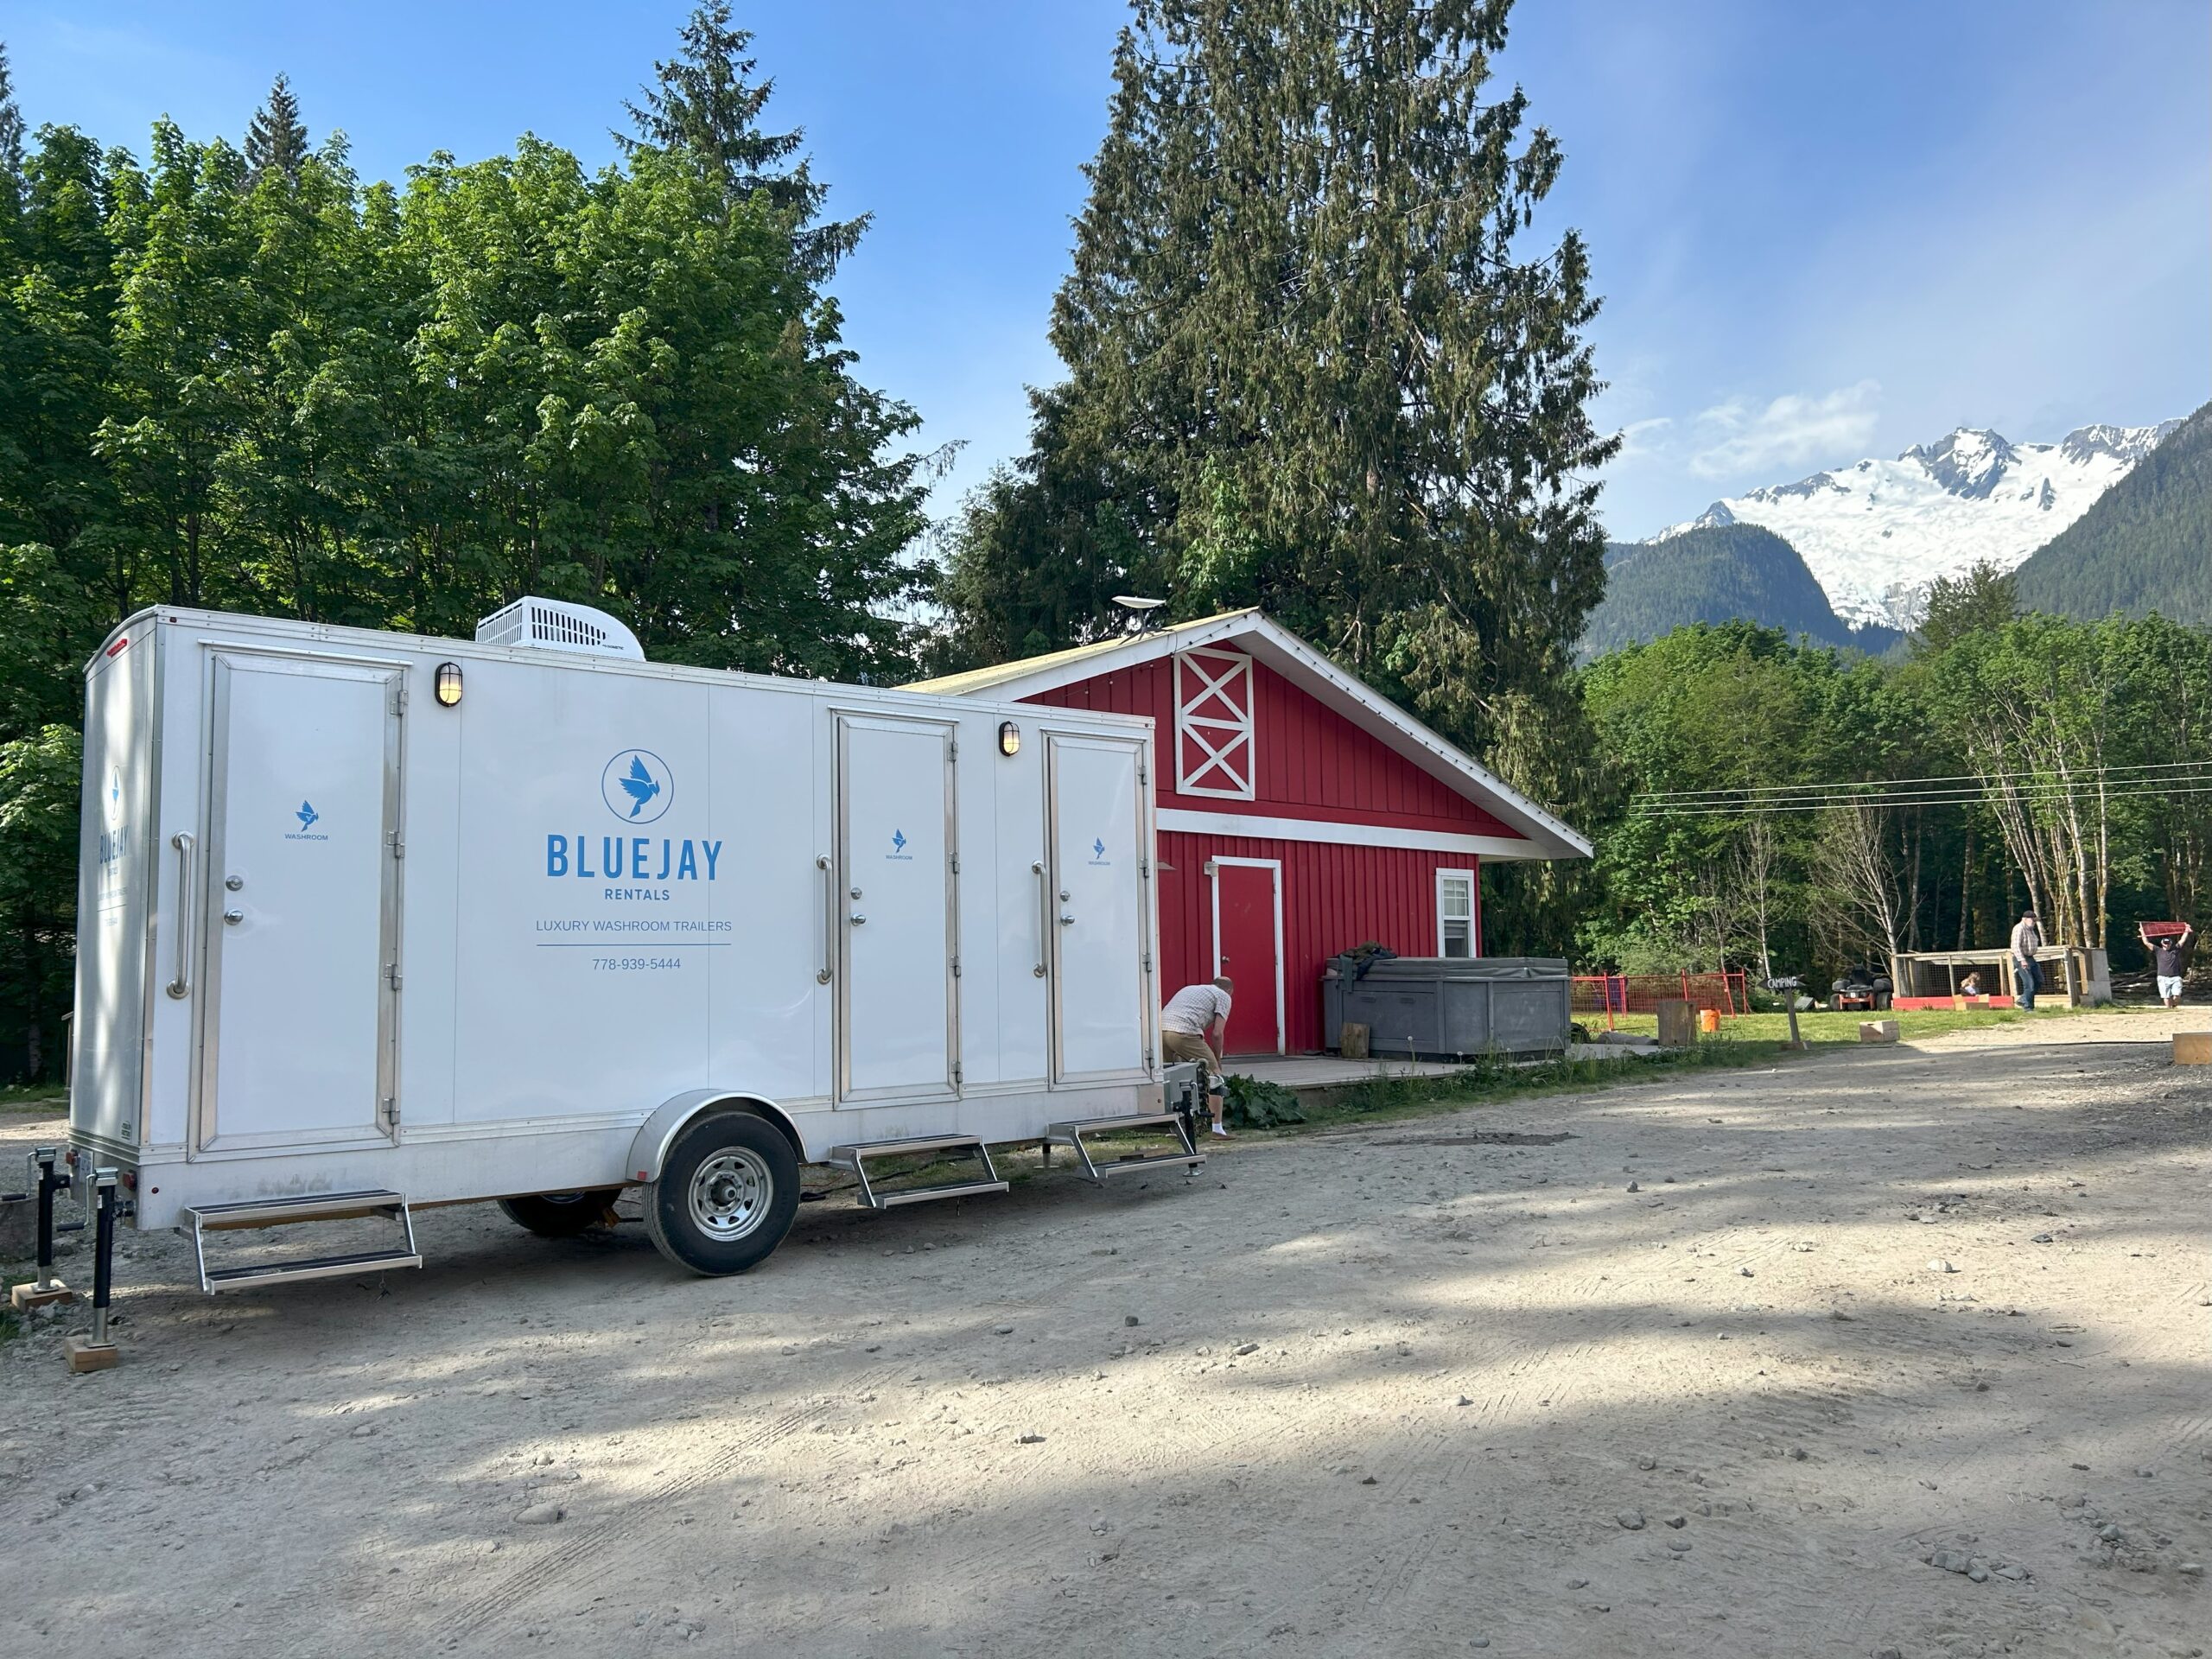 Maximizing Comfort and Sanitation with Washroom Trailer Rentals at Your Outdoor Event